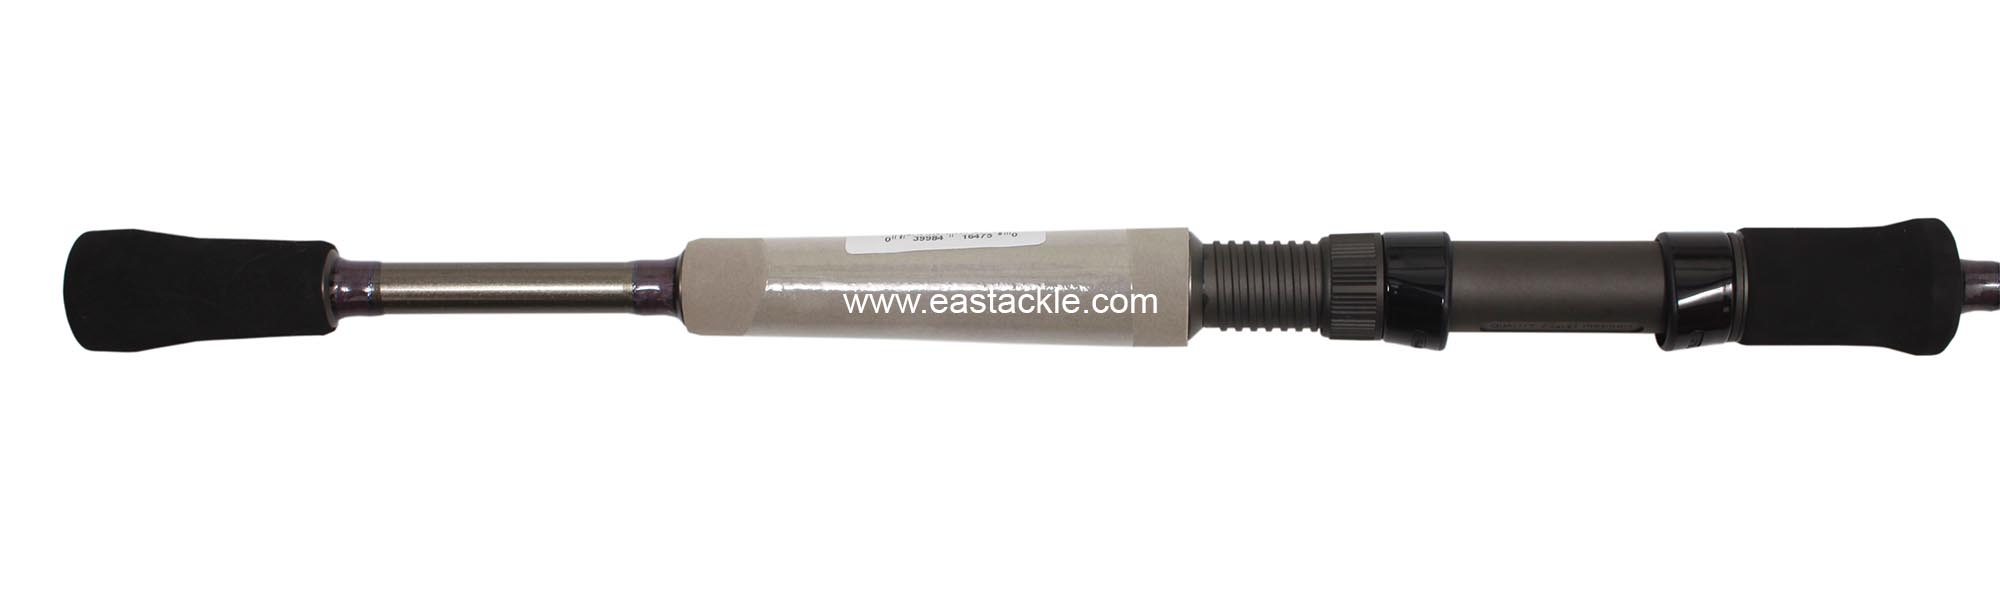 Storm - Adventure - Spinning Rods - Handle Section (Side View) | Eastackle